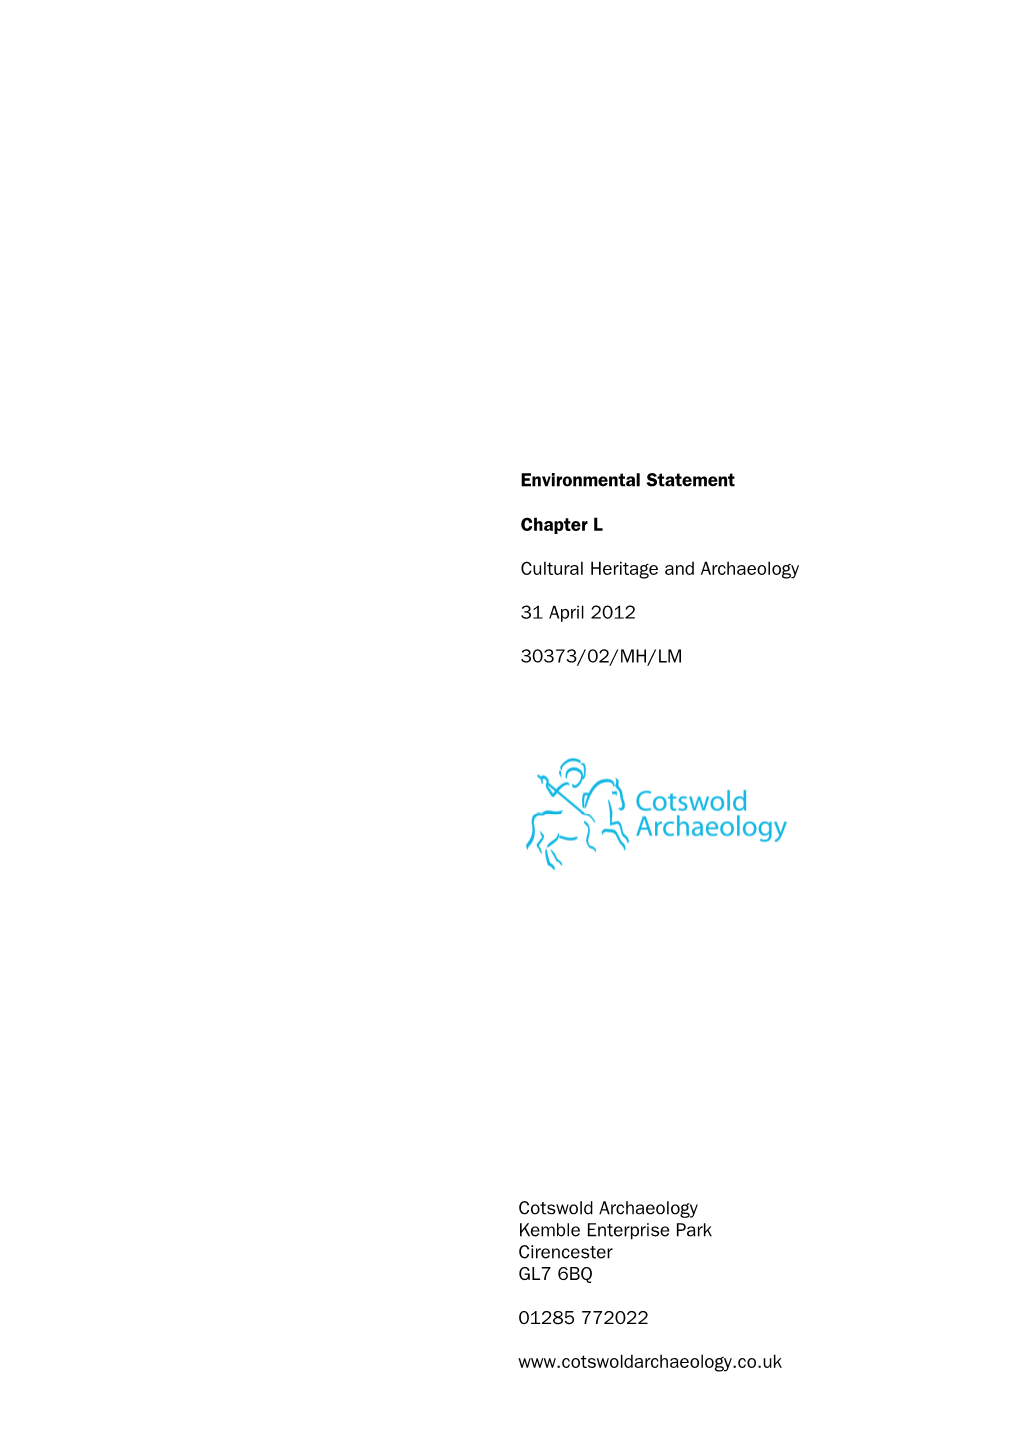 Environmental Statement Chapter L Cultural Heritage and Archaeology